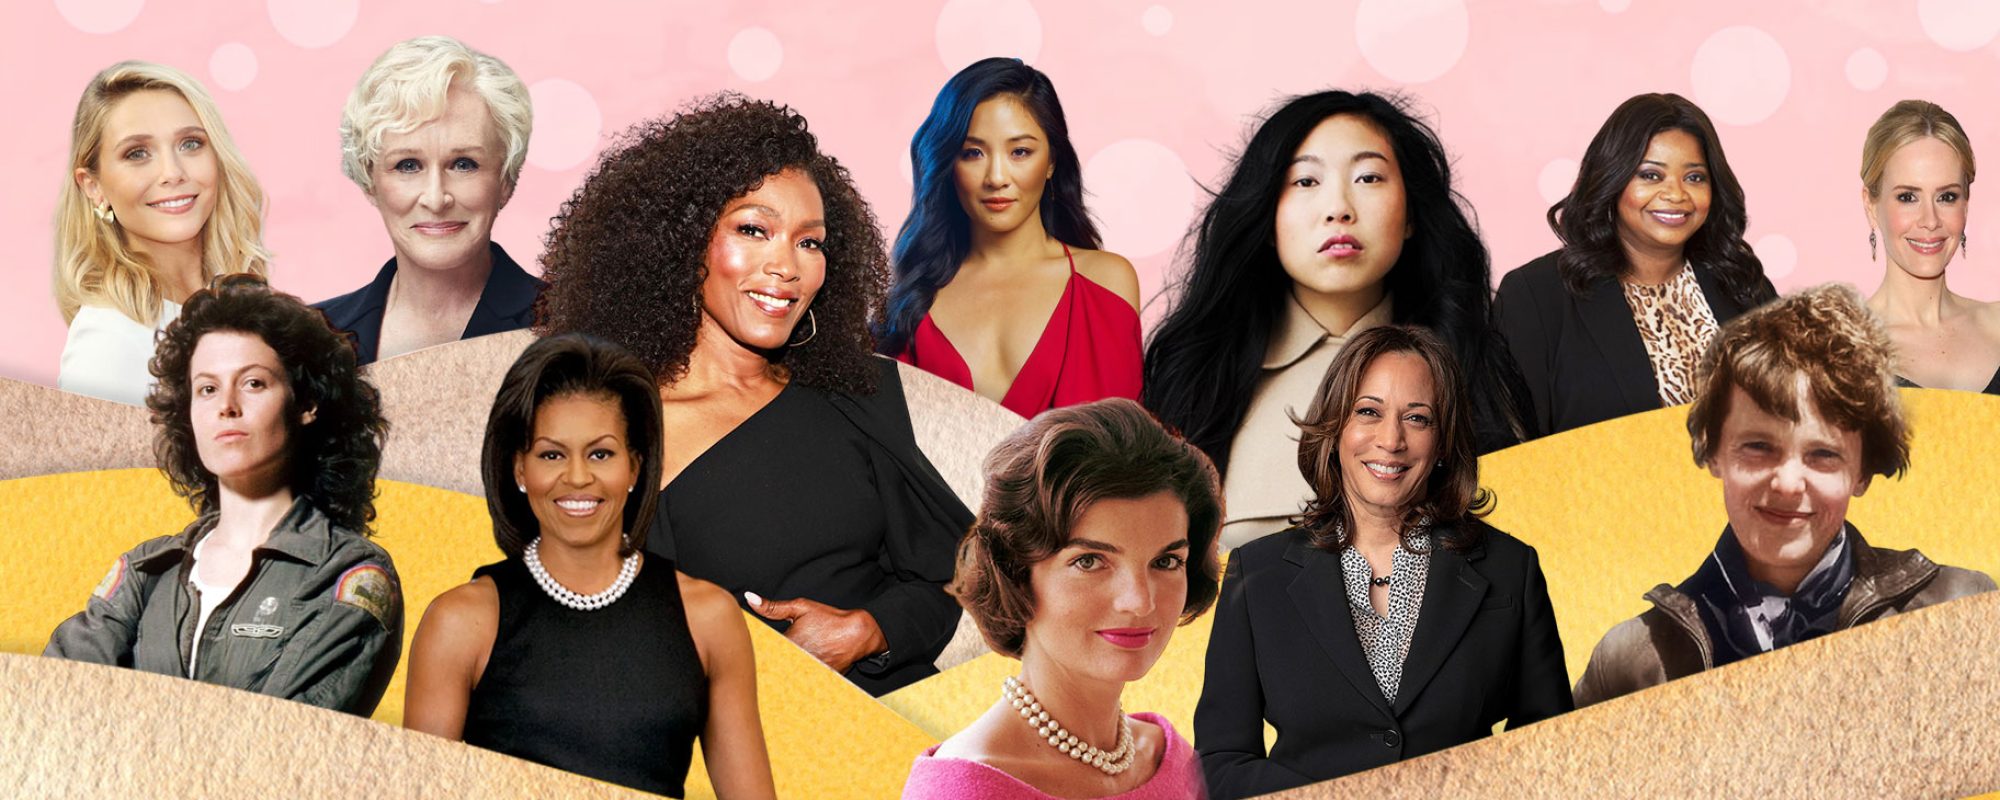 OVATION TV CELEBRATES WOMEN’S HISTORY MONTH 2023 WITH WEEK-DAY MORNING LINEAR PROGRAMMING,  INCLUDING NETWORK PREMIERES, AND A CURATED ON-DEMAND LINEUP OF DOCS & SERIES